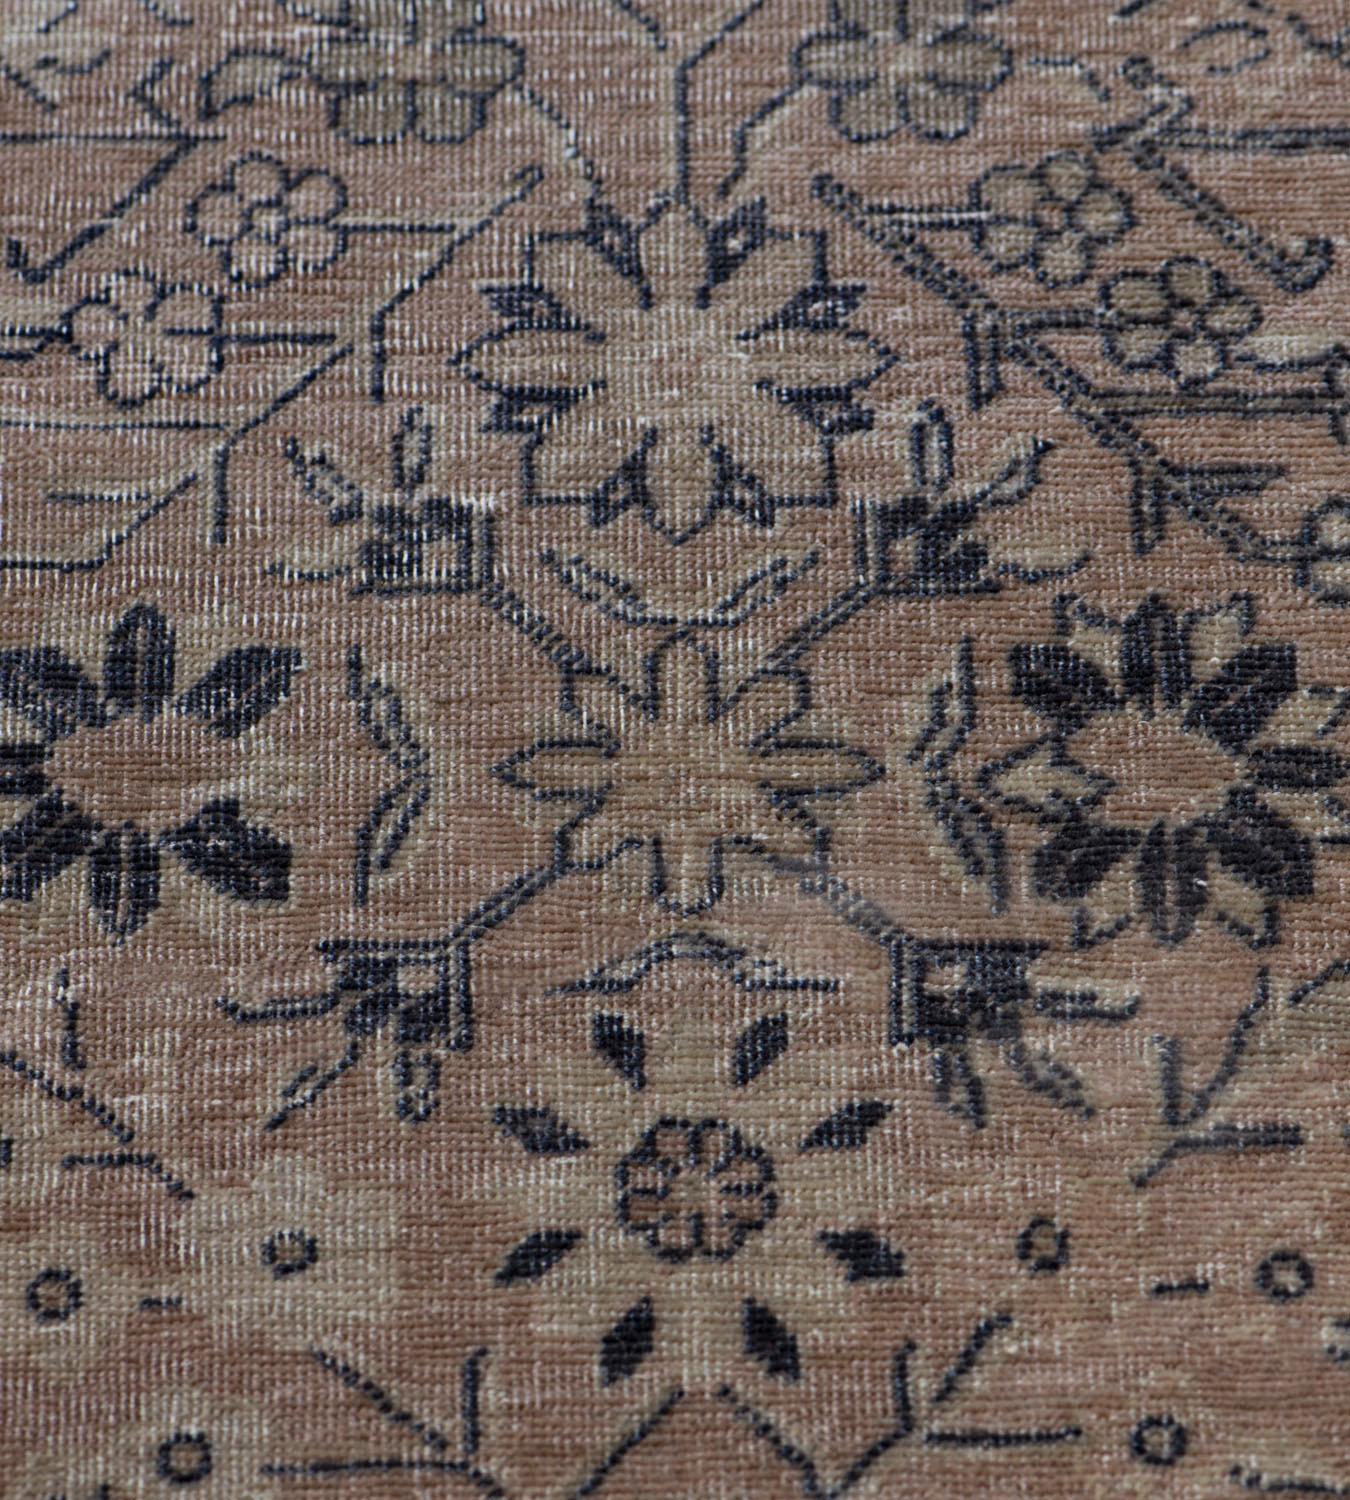 Handwoven Wool Early 20th Century Turkish Sivas Rug In Good Condition For Sale In West Hollywood, CA